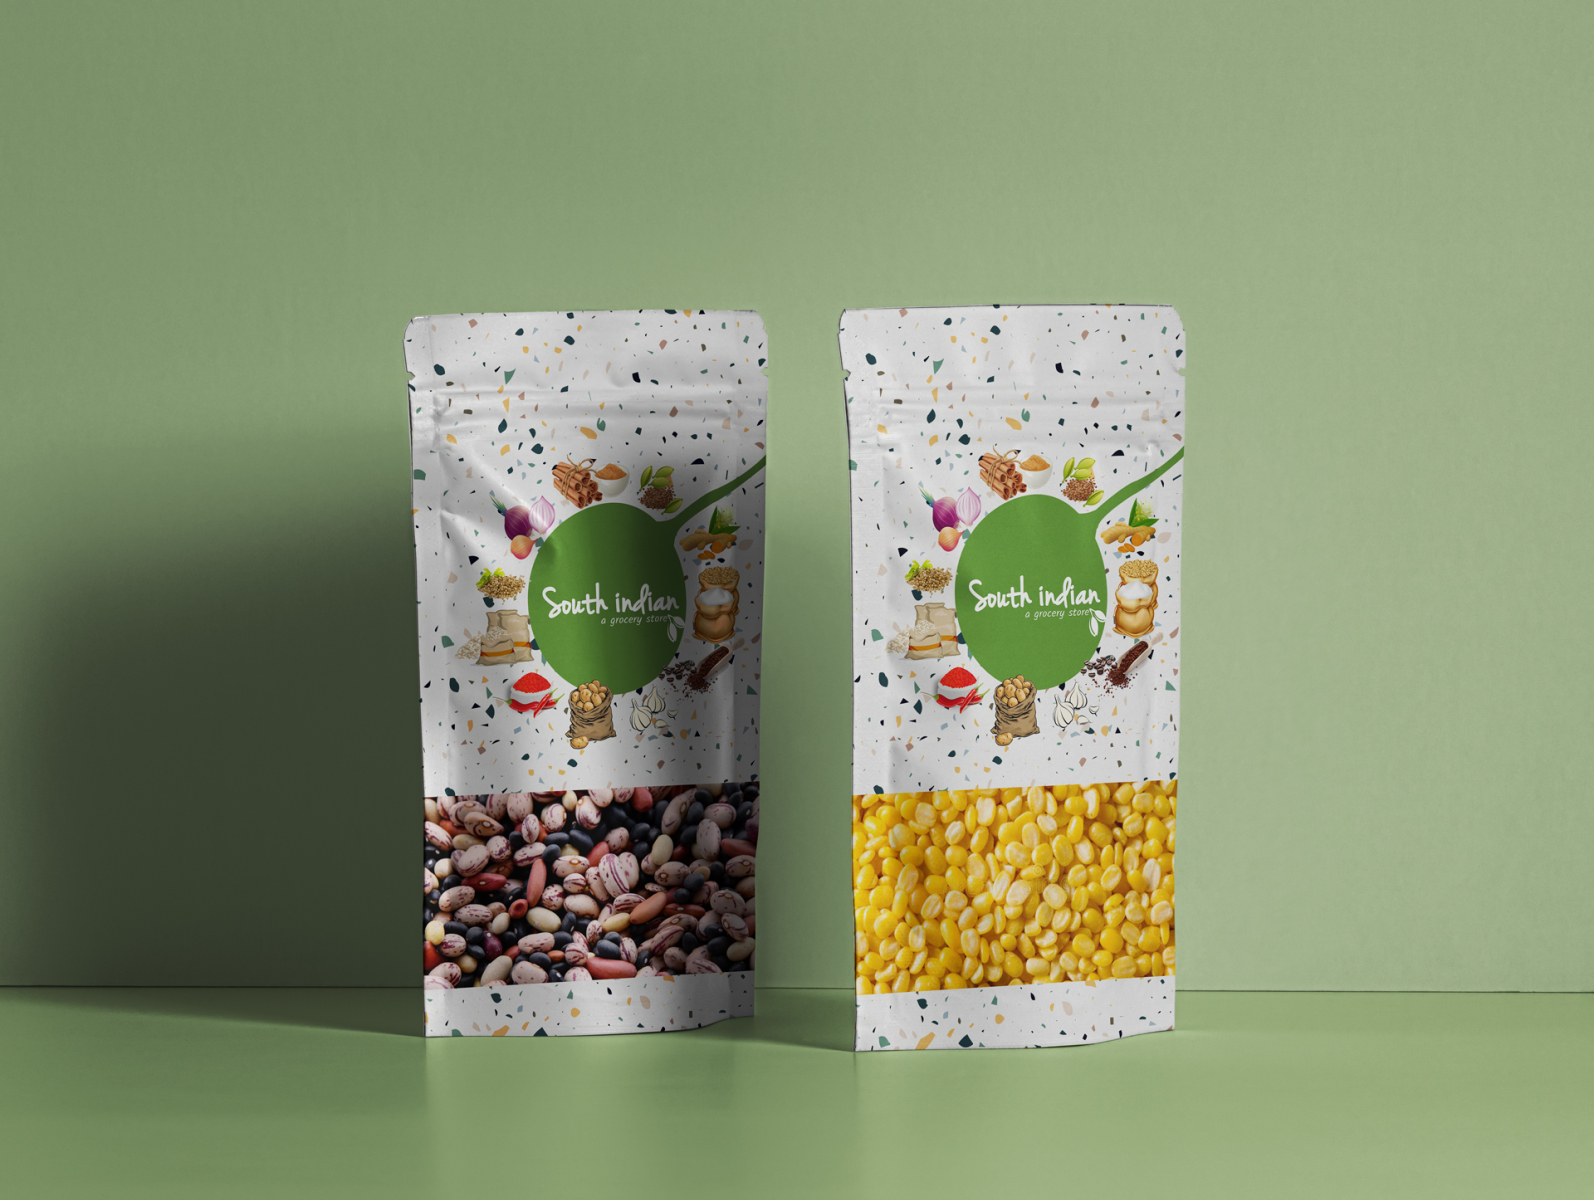 South Indian Grocery Branding by brand me on Dribbble